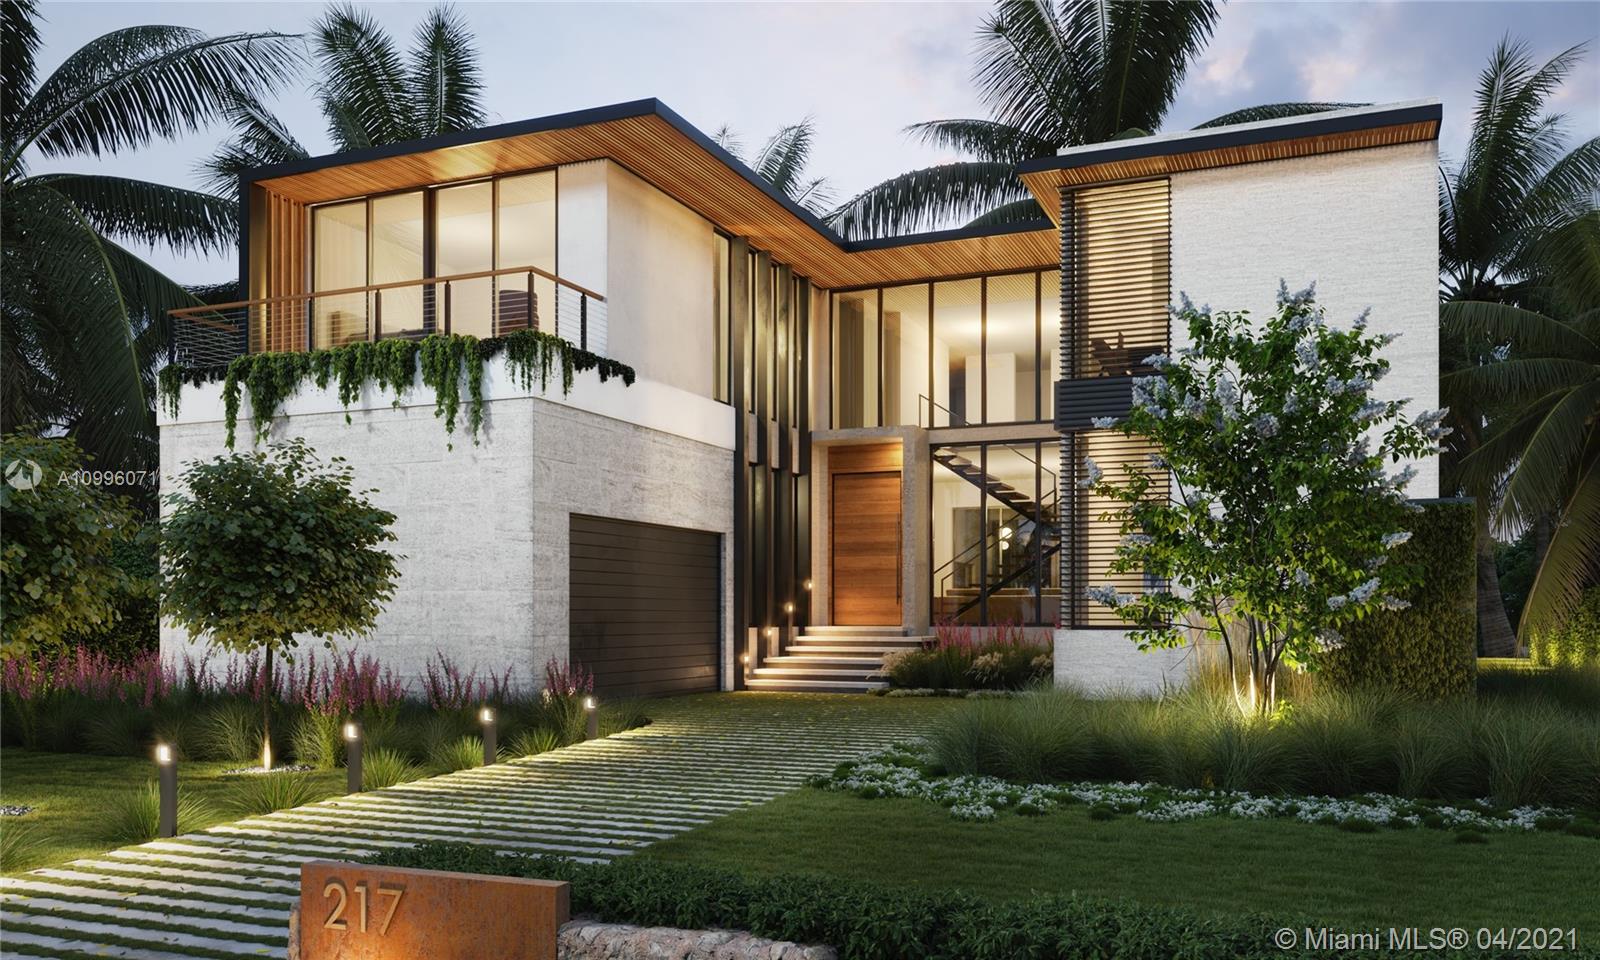 BRAND NEW CONSTRUCTION IN EXCLUSIVE BAL HARBOUR VILLAGE!! This Tropical Modern luxury residence is located in the private, guard-gated enclave of Bal Harbour Village. Designed for modern living, this customizable 6,866 SF home features seamless indoor/outdoor living with 6 BR/6.5 BTH, floor-to-ceiling glass walls, a sculptural floating staircase, and a stunning entry courtyard with a 30-ft tall green living wall. Exquisite finishes throughout including exotic hardwoods and natural stone, Italian chef's kitchen with Subzero and Wolf appliances, smart home technology, and more.  Buyers may participate in the selection of finishes at this time. Contact Listing Agent for more details and a presentation package.